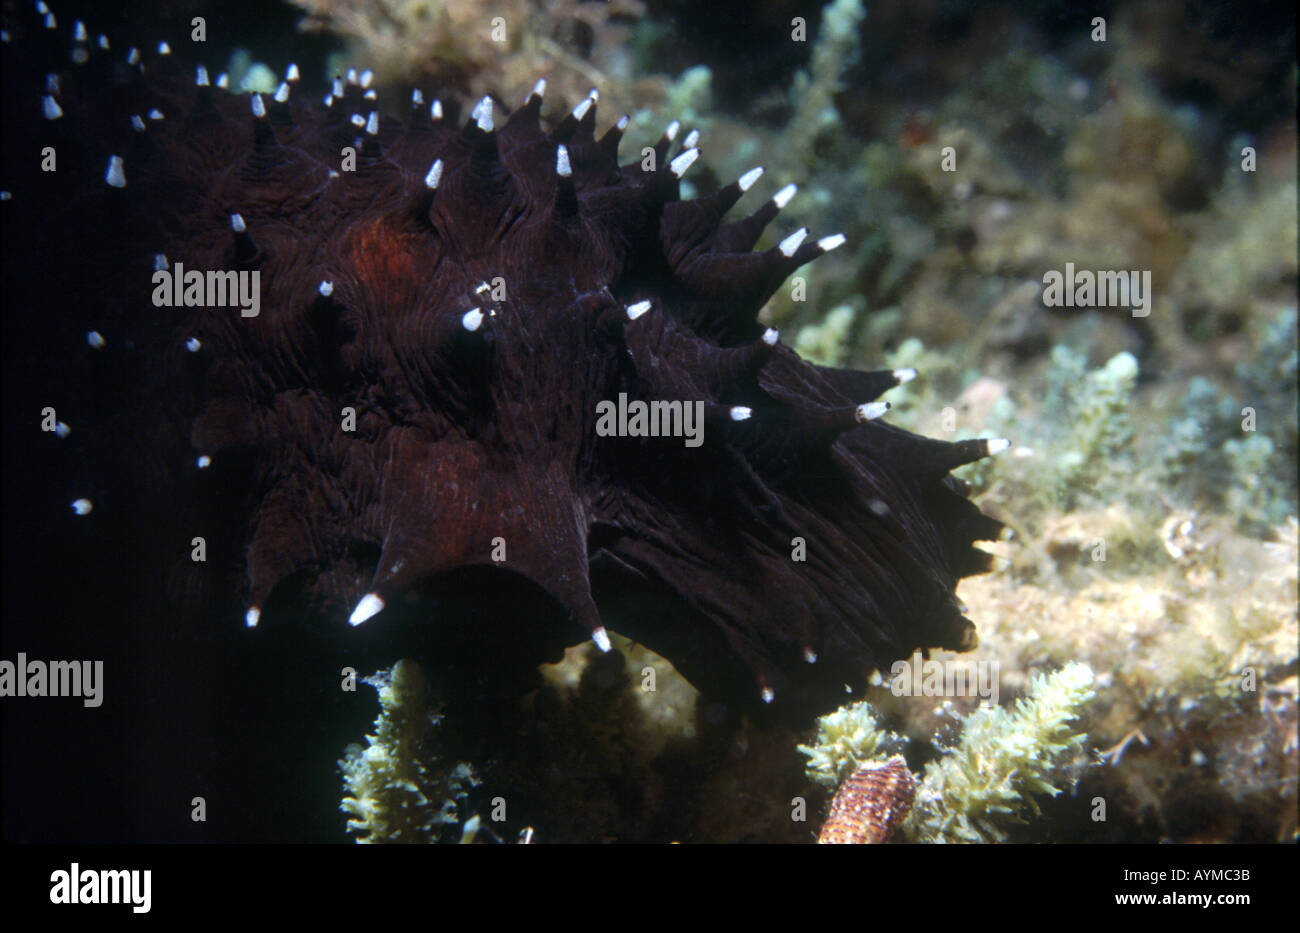 Black color tapered conical papillae white near the end with black tips identify this sea cucumber as Holothuria forskali Stock Photo